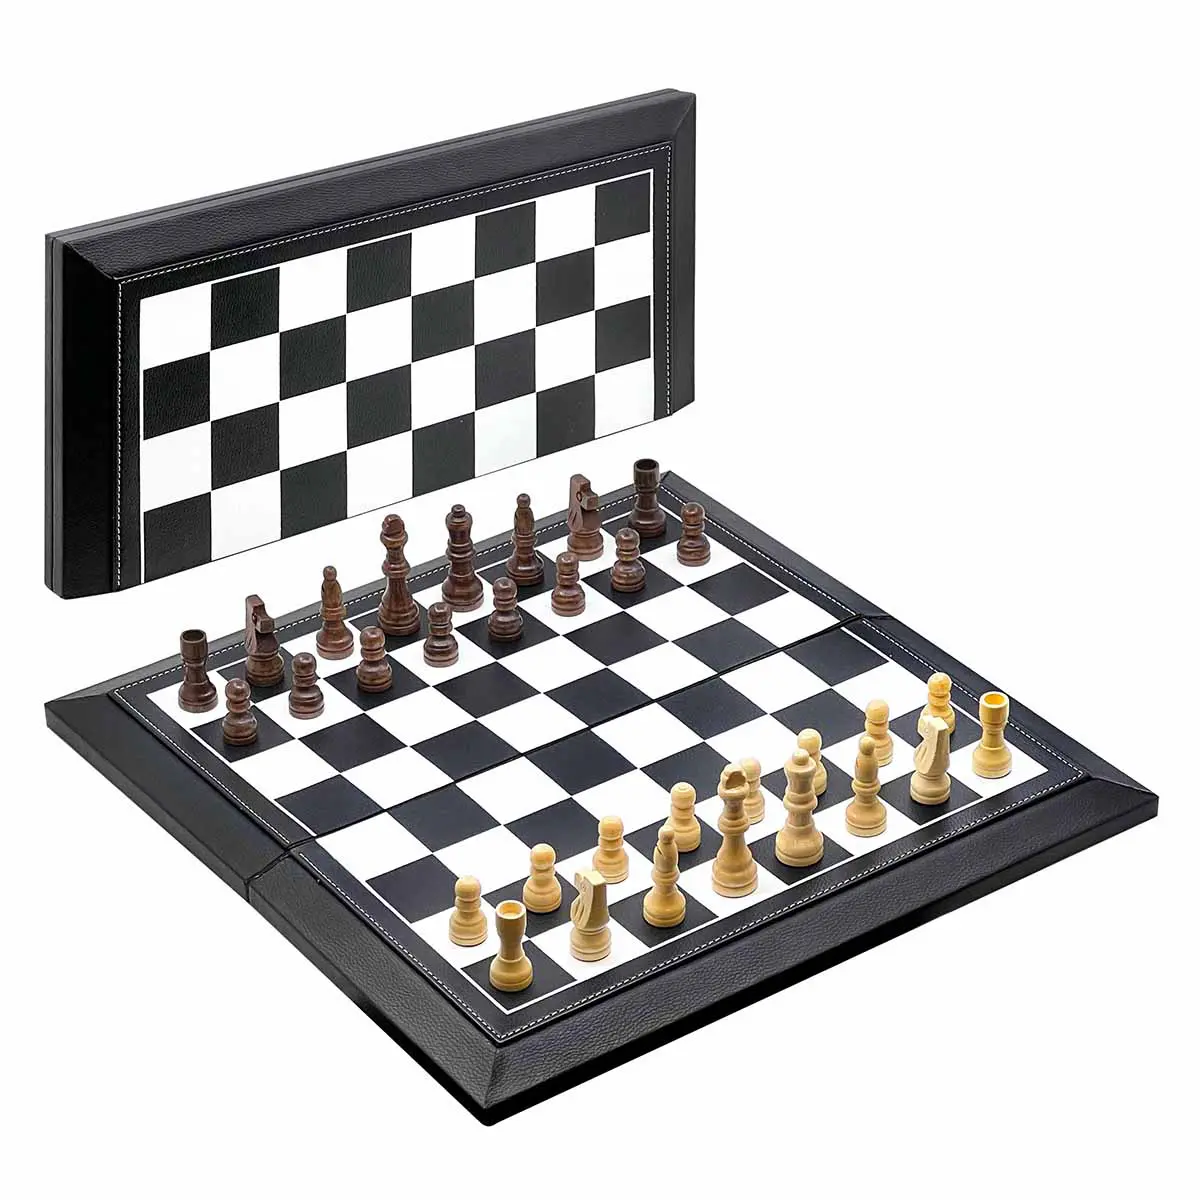 Classic Black chess set and board game collection